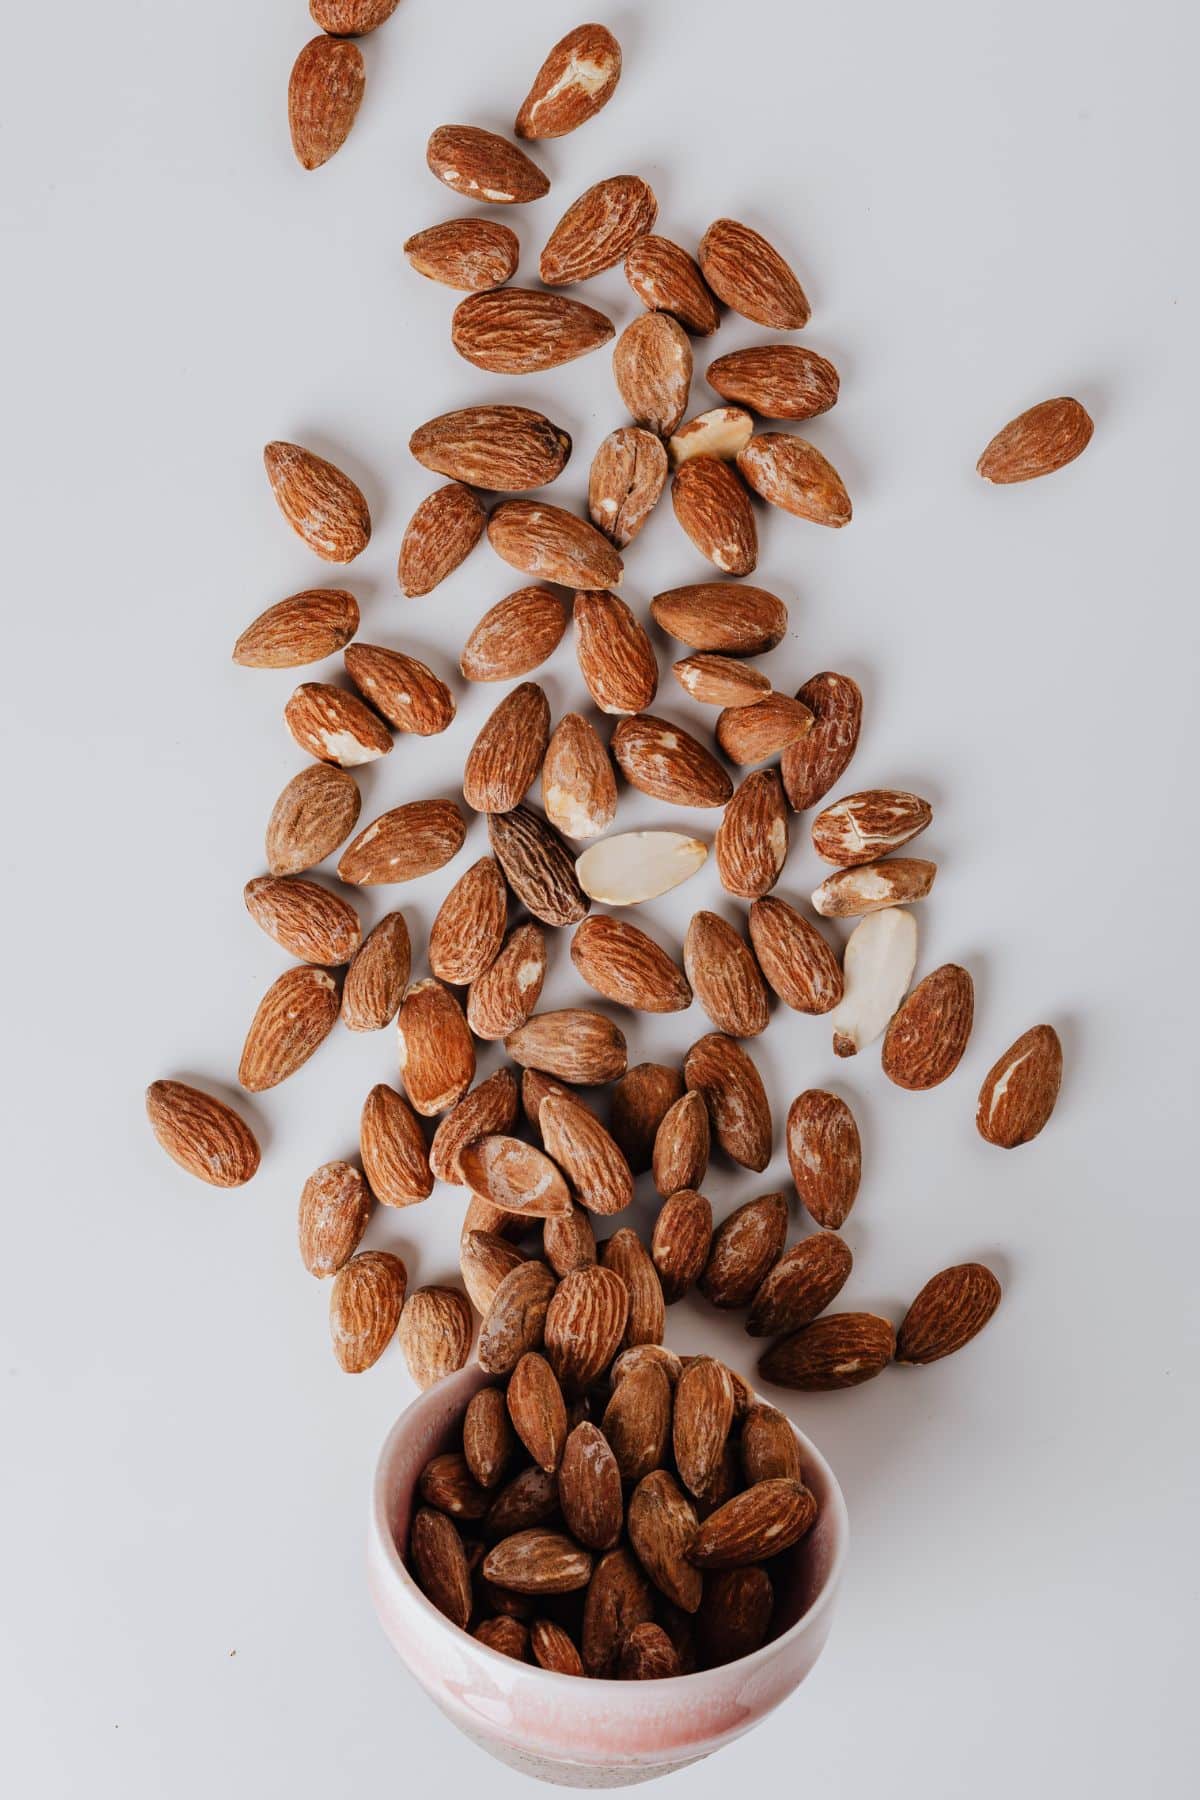 almonds spilling out of a bowl.